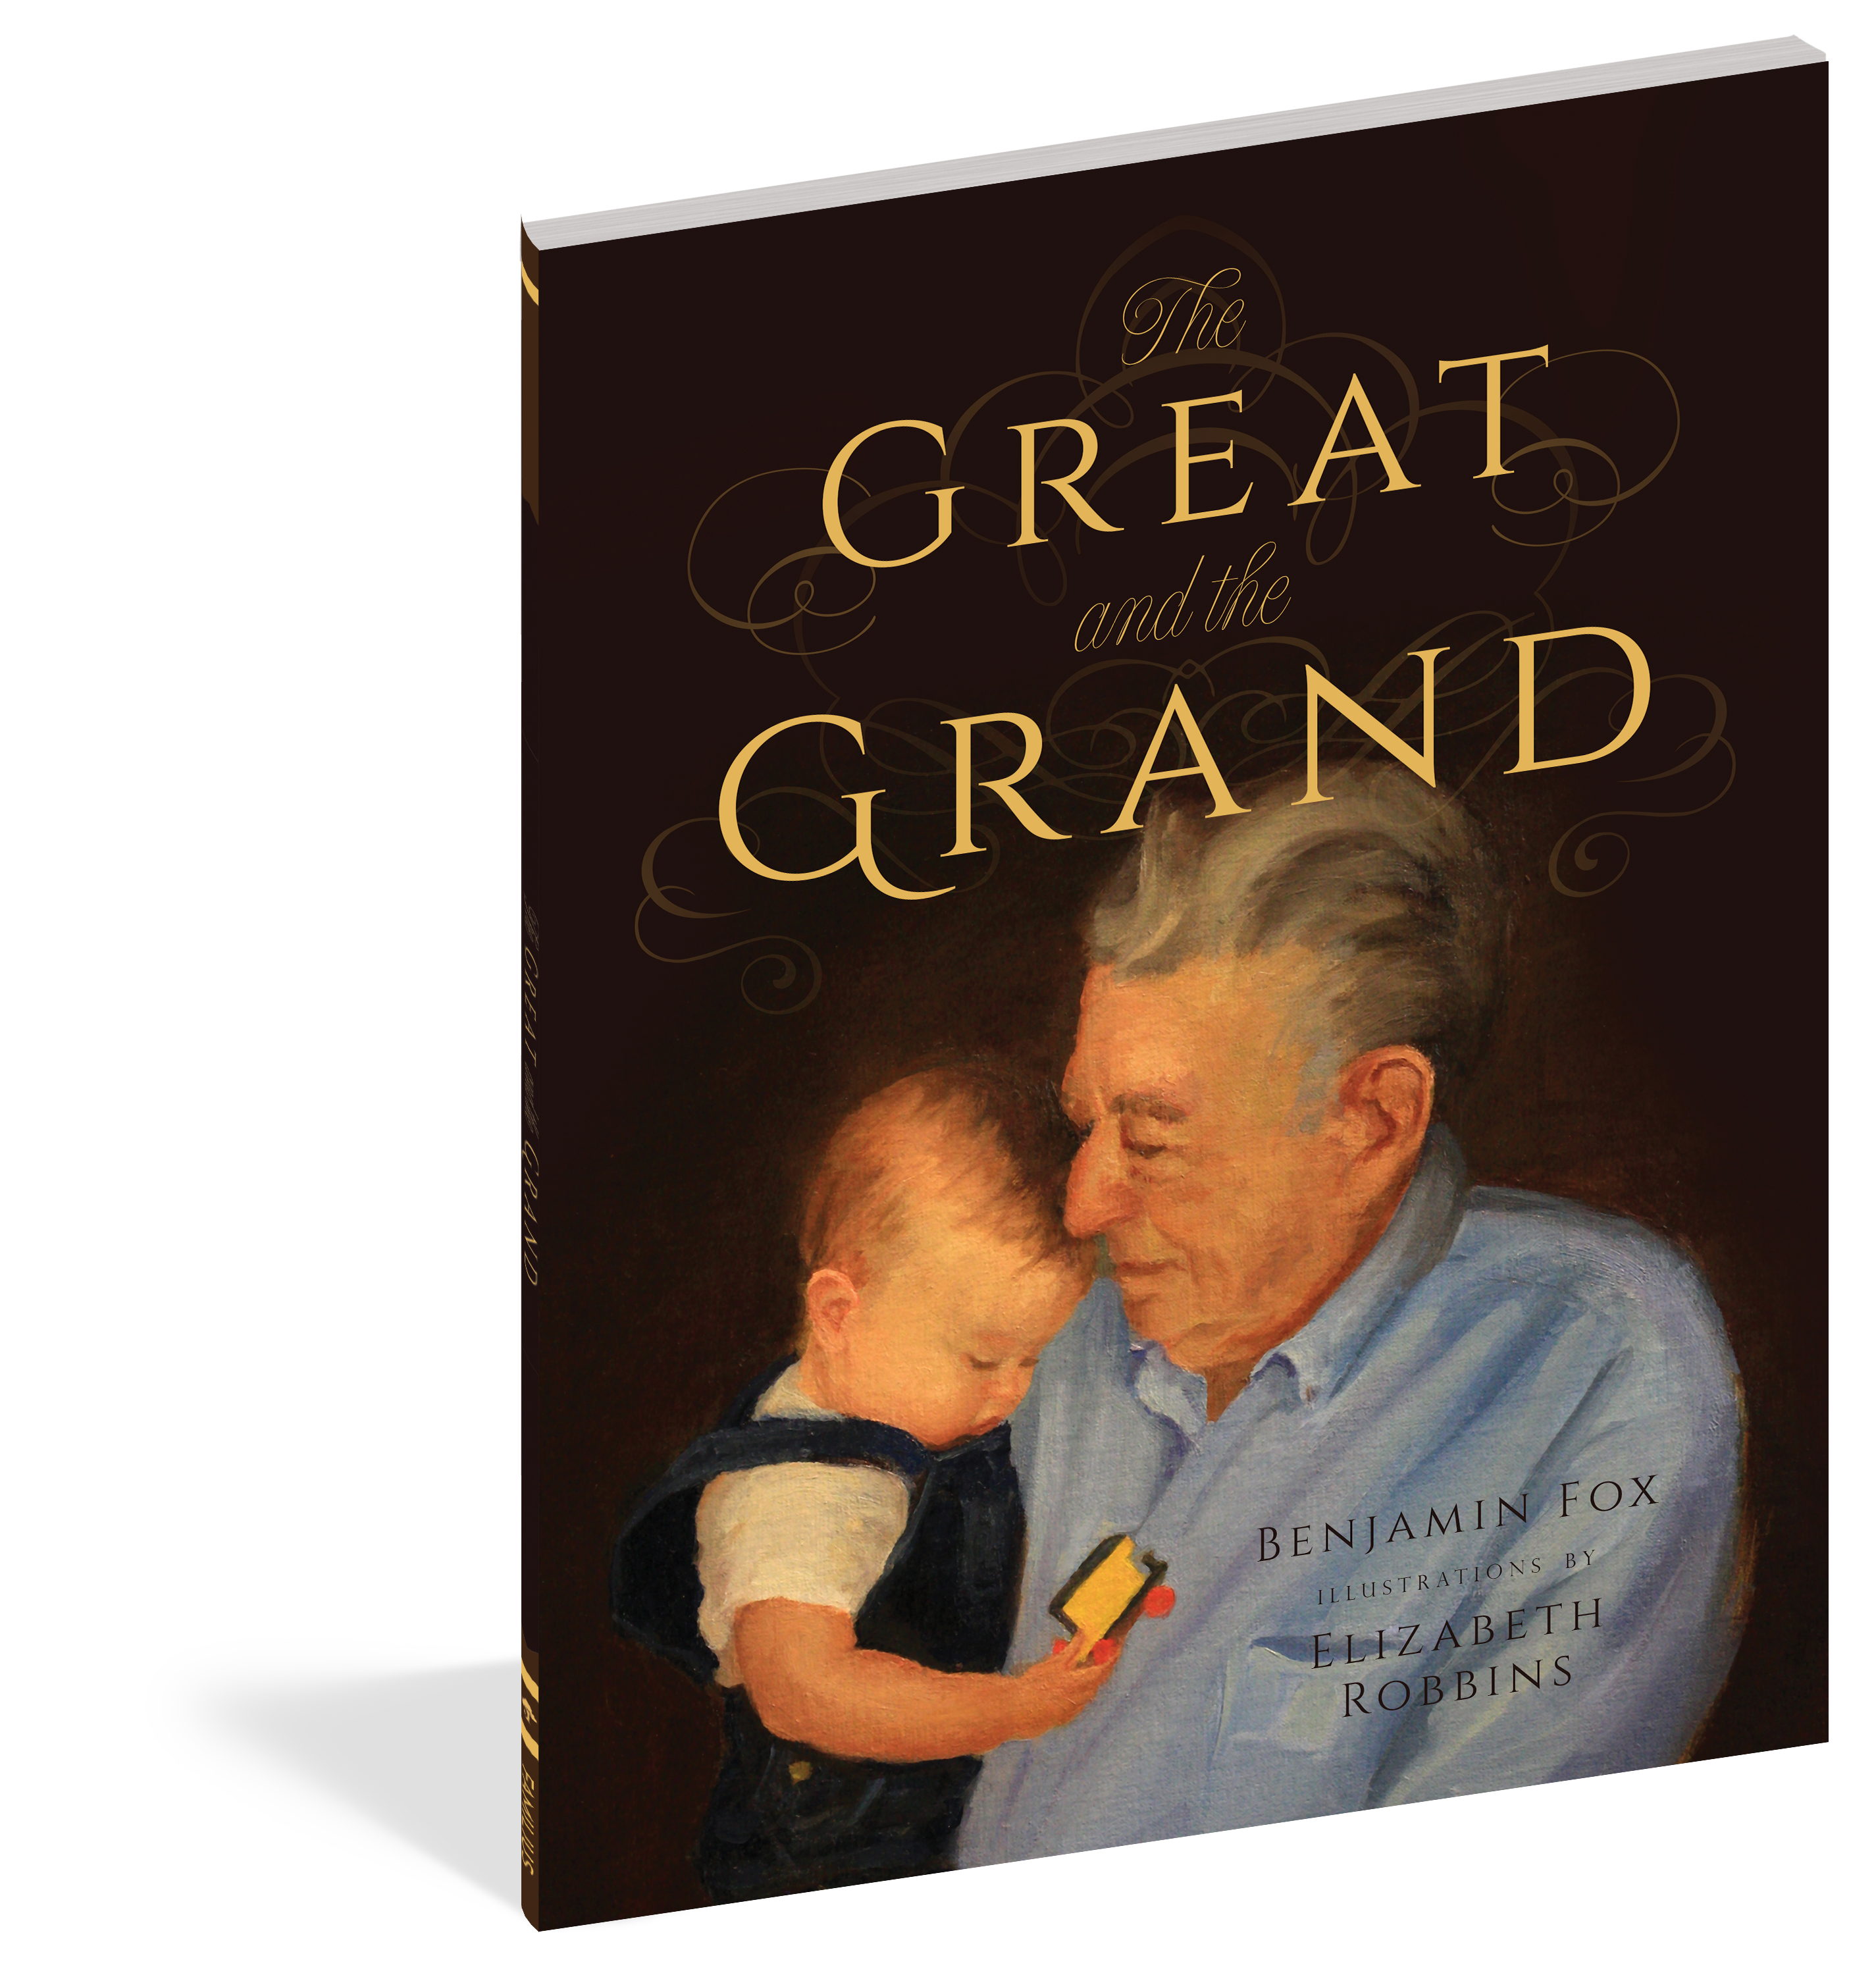 The cover of the picture book The Great and the Grand.